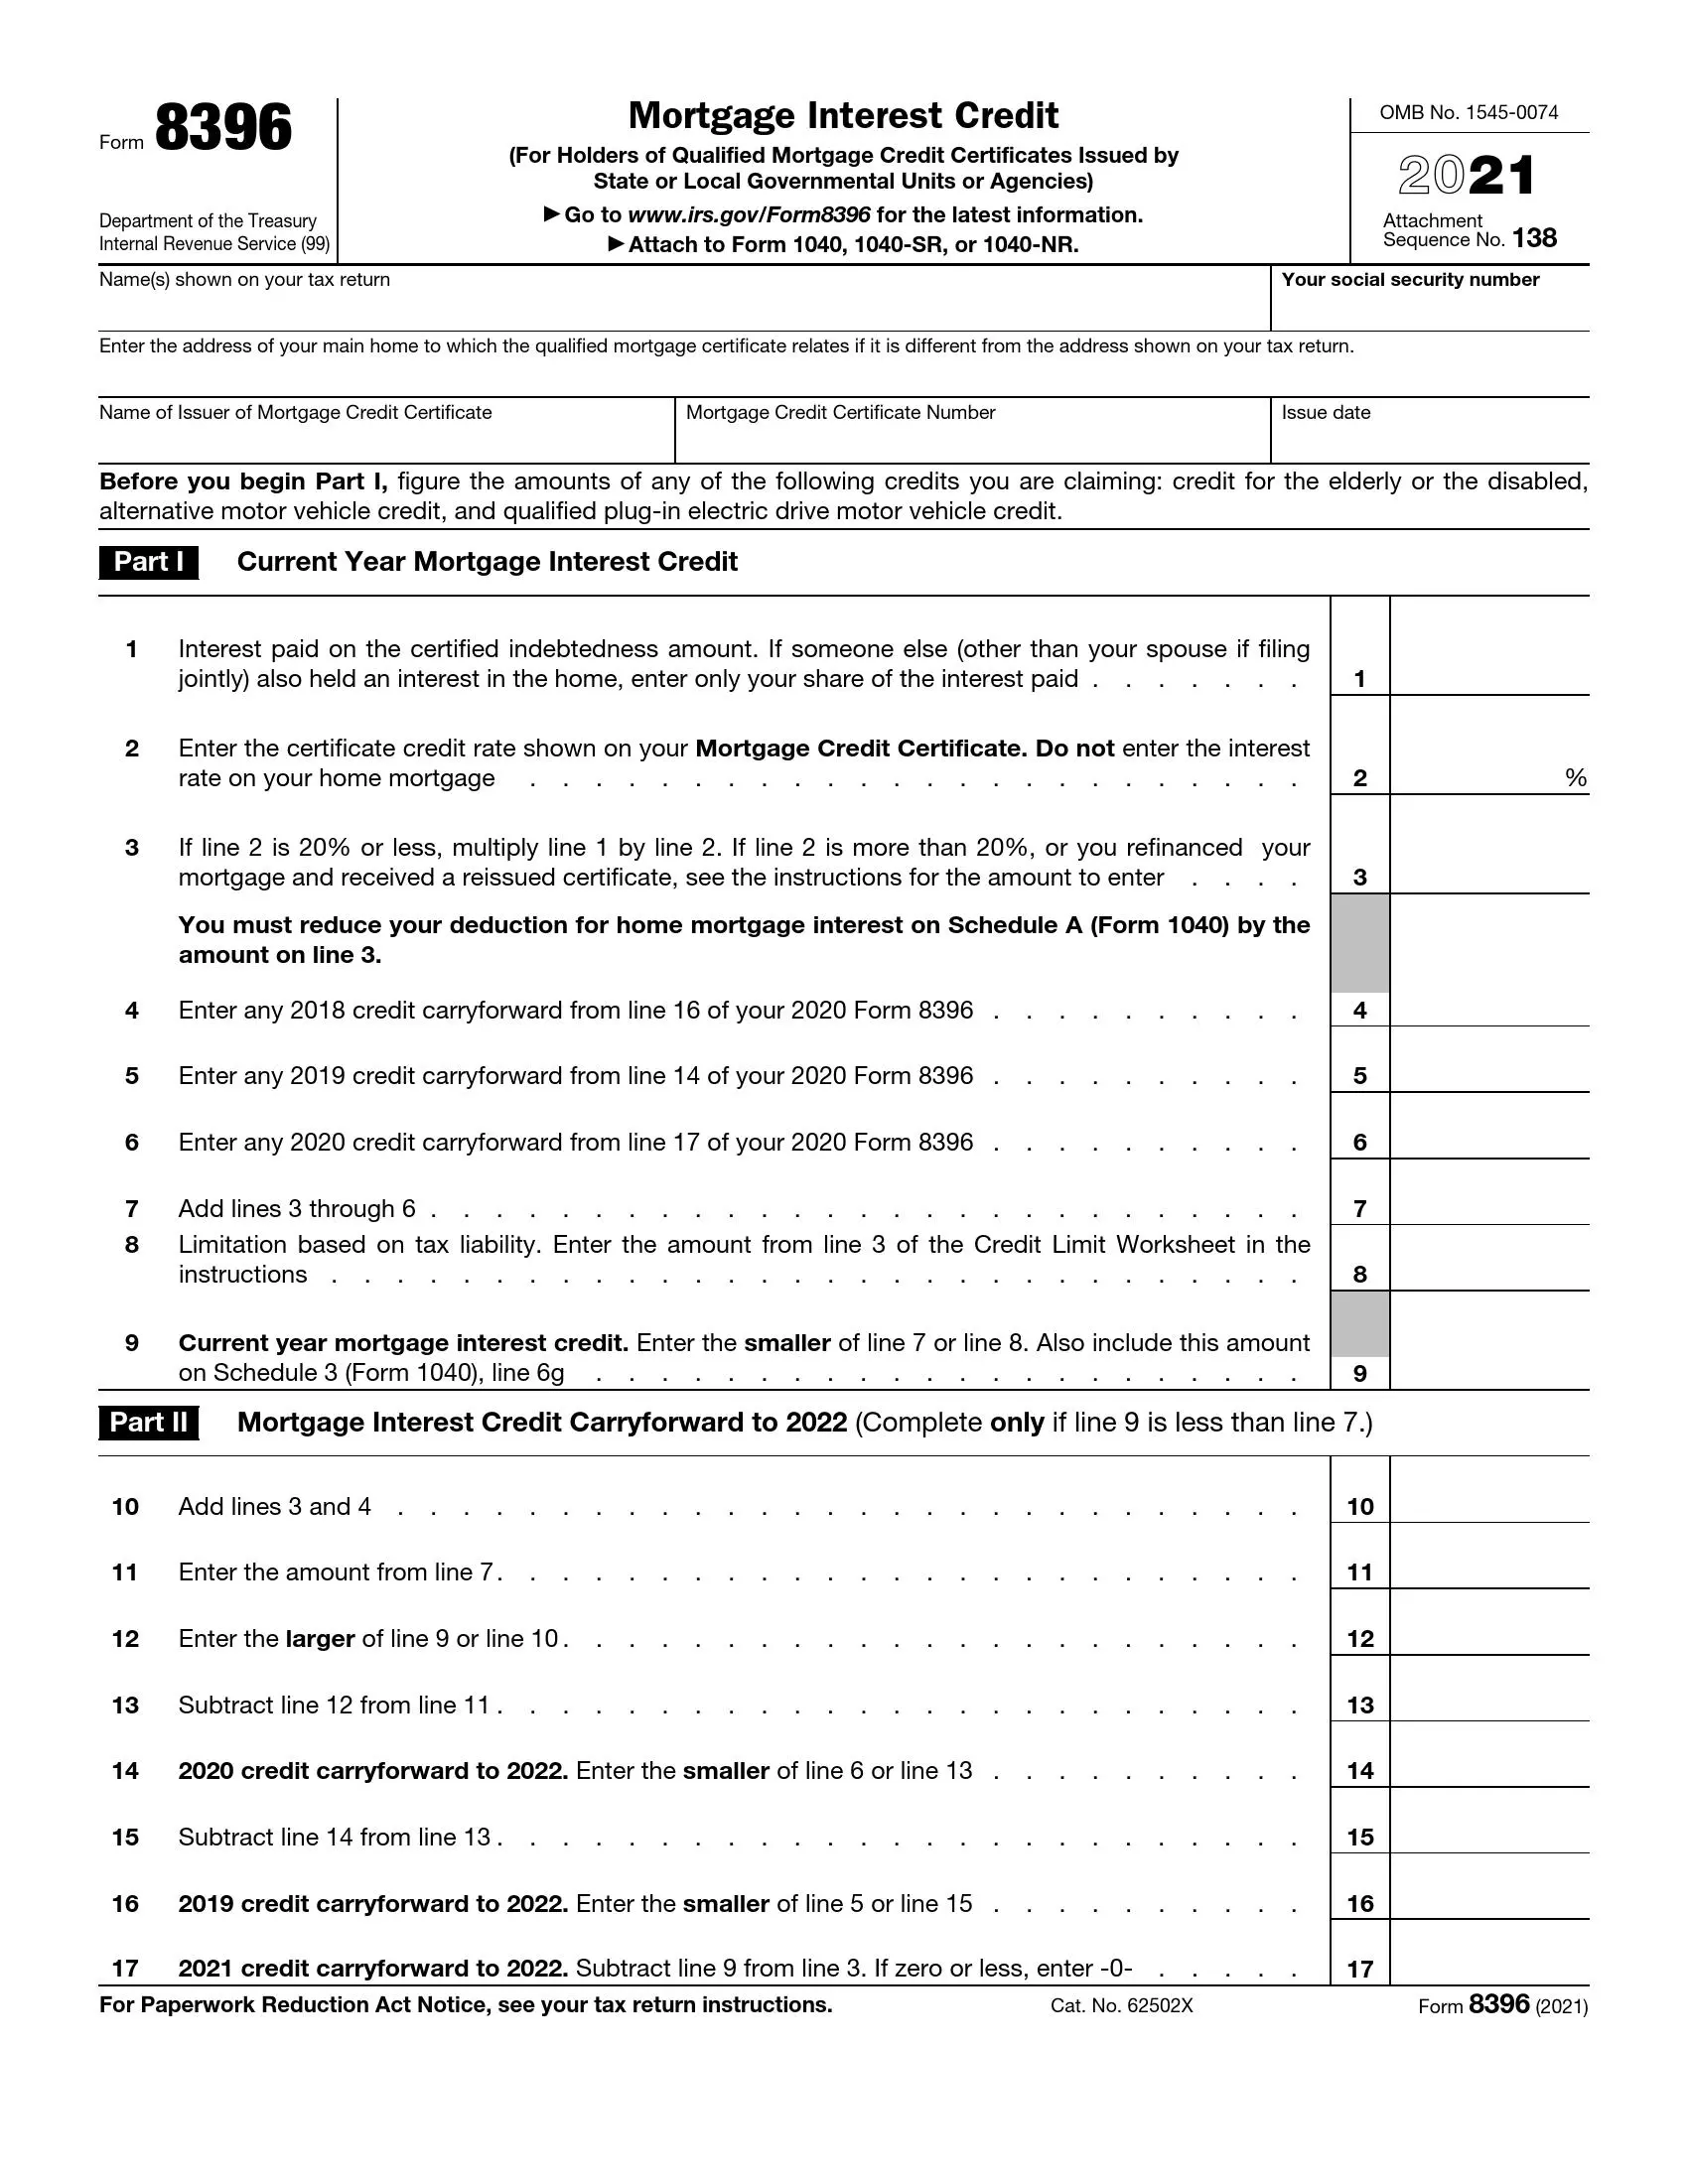 irs form 8396 2021 preview